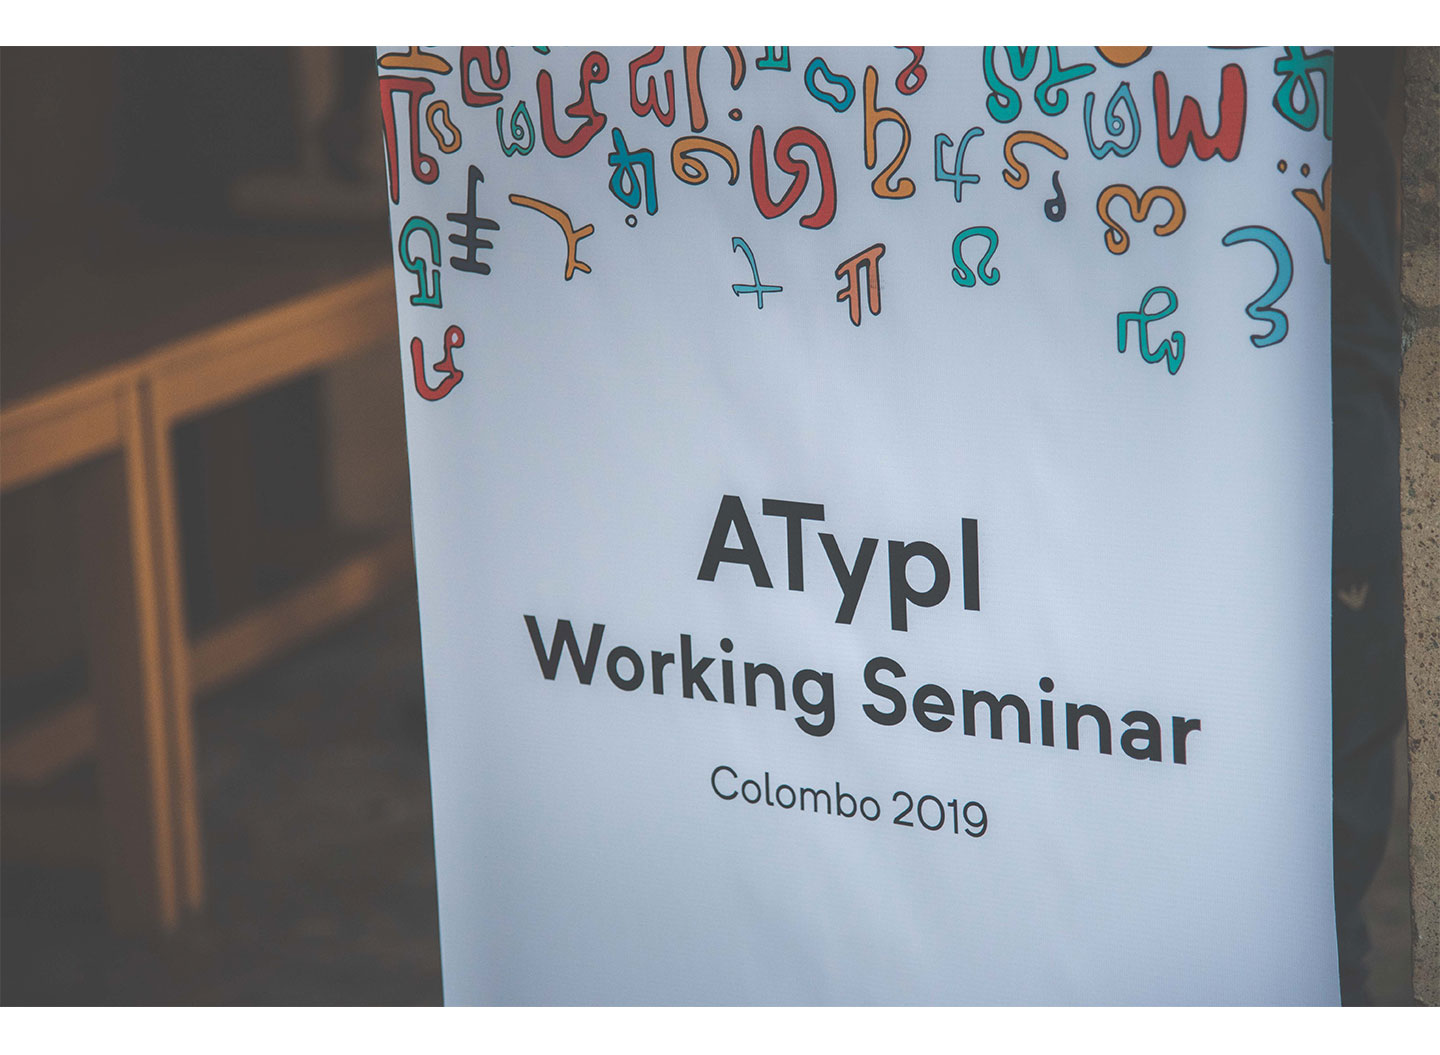 ATypI Working Seminar Colombo 2019 written on a banner with some branding design